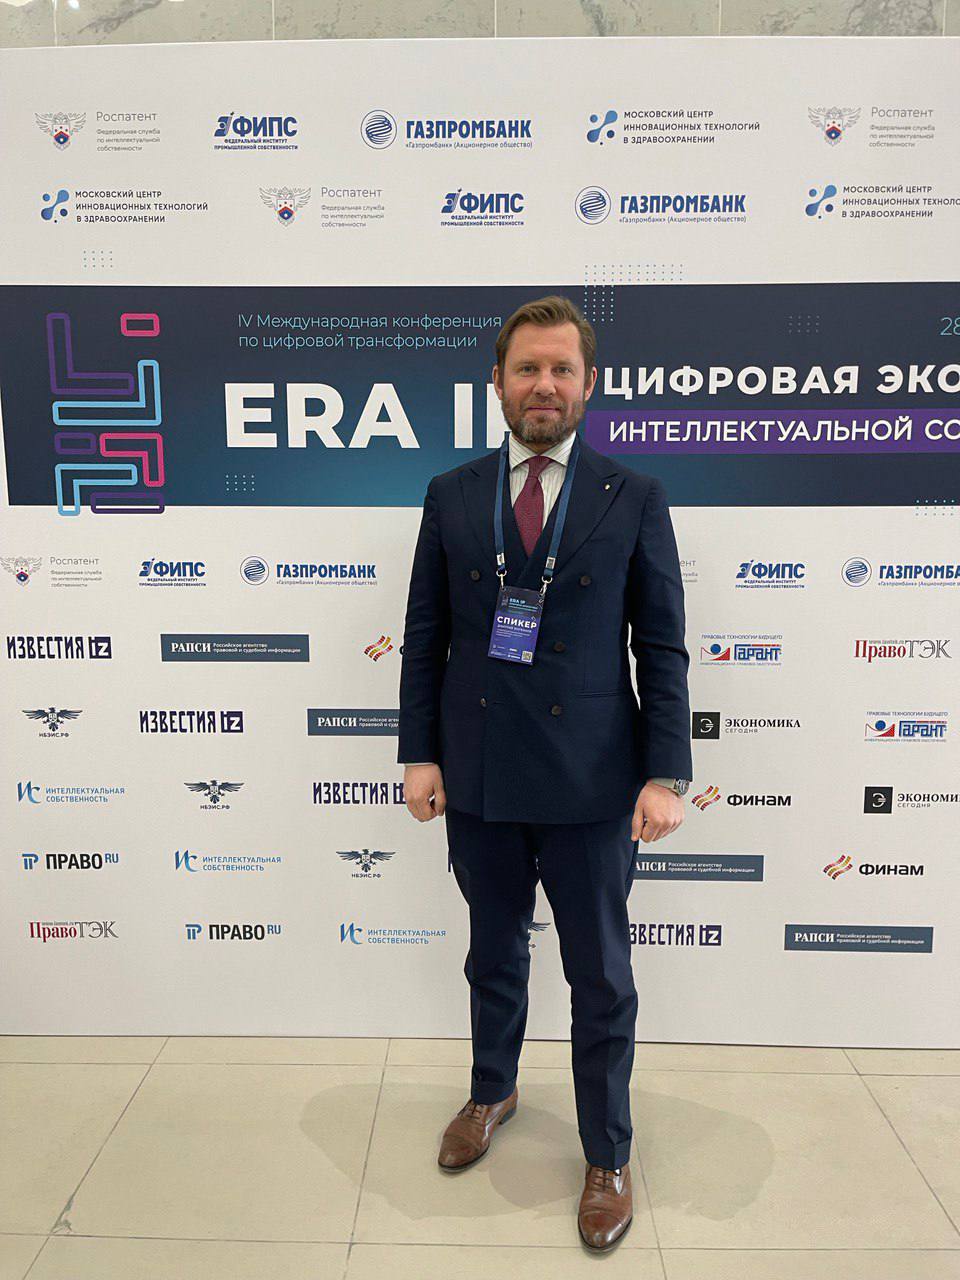 Dmitry Markanov spoke at the Digital Transformation Conference: "ERA IP: The Digital Ecosystem of Intellectual Property